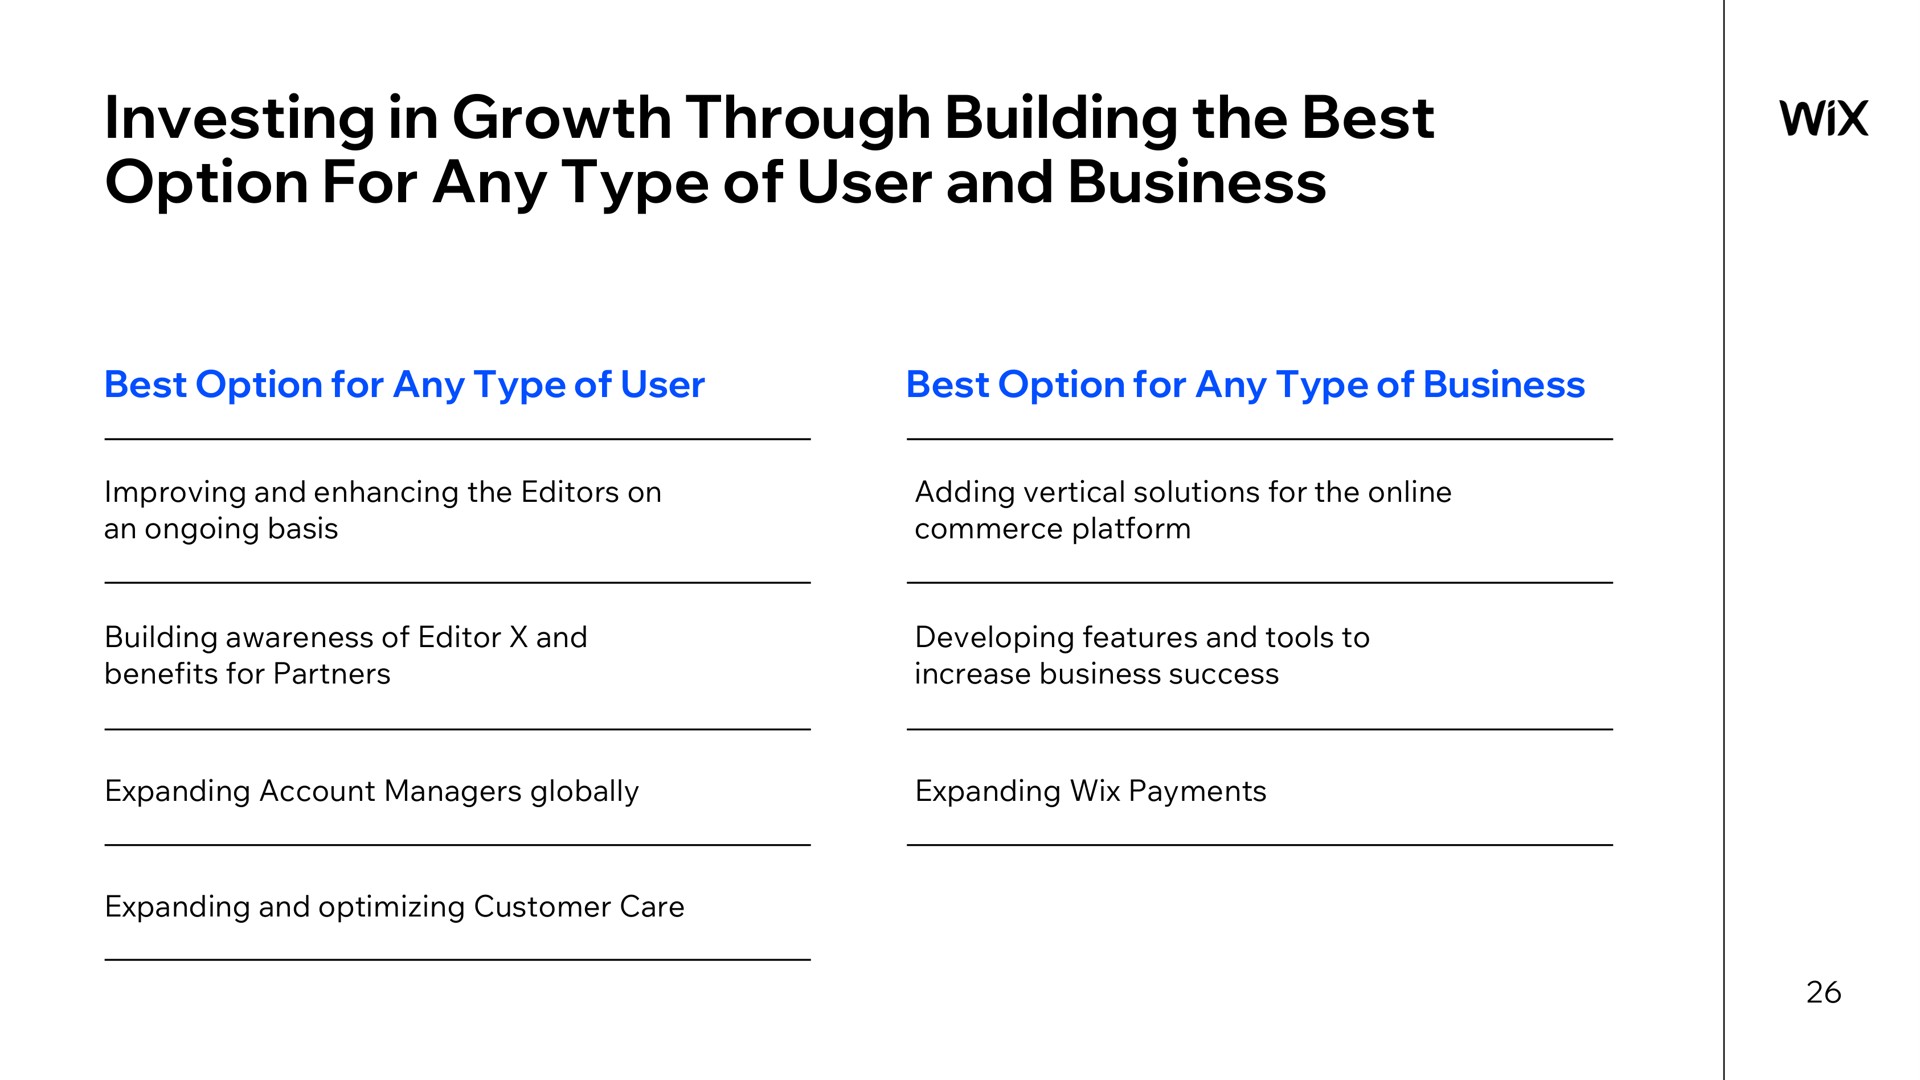 investing in growth through building the best option for any type of user and business | Wix